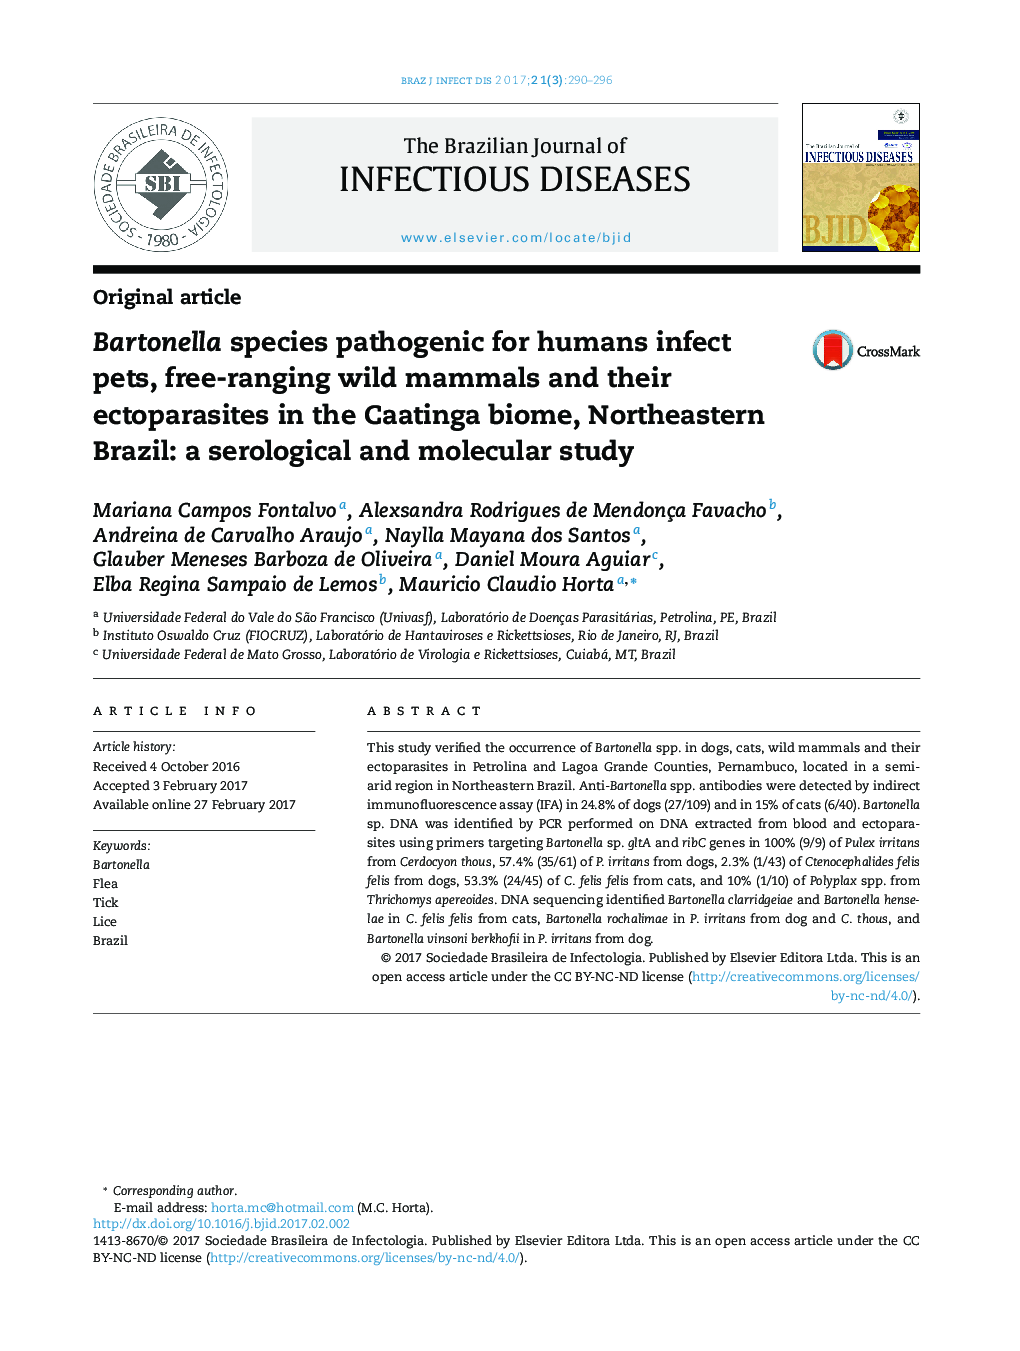 Bartonella species pathogenic for humans infect pets, free-ranging wild mammals and their ectoparasites in the Caatinga biome, Northeastern Brazil: a serological and molecular study